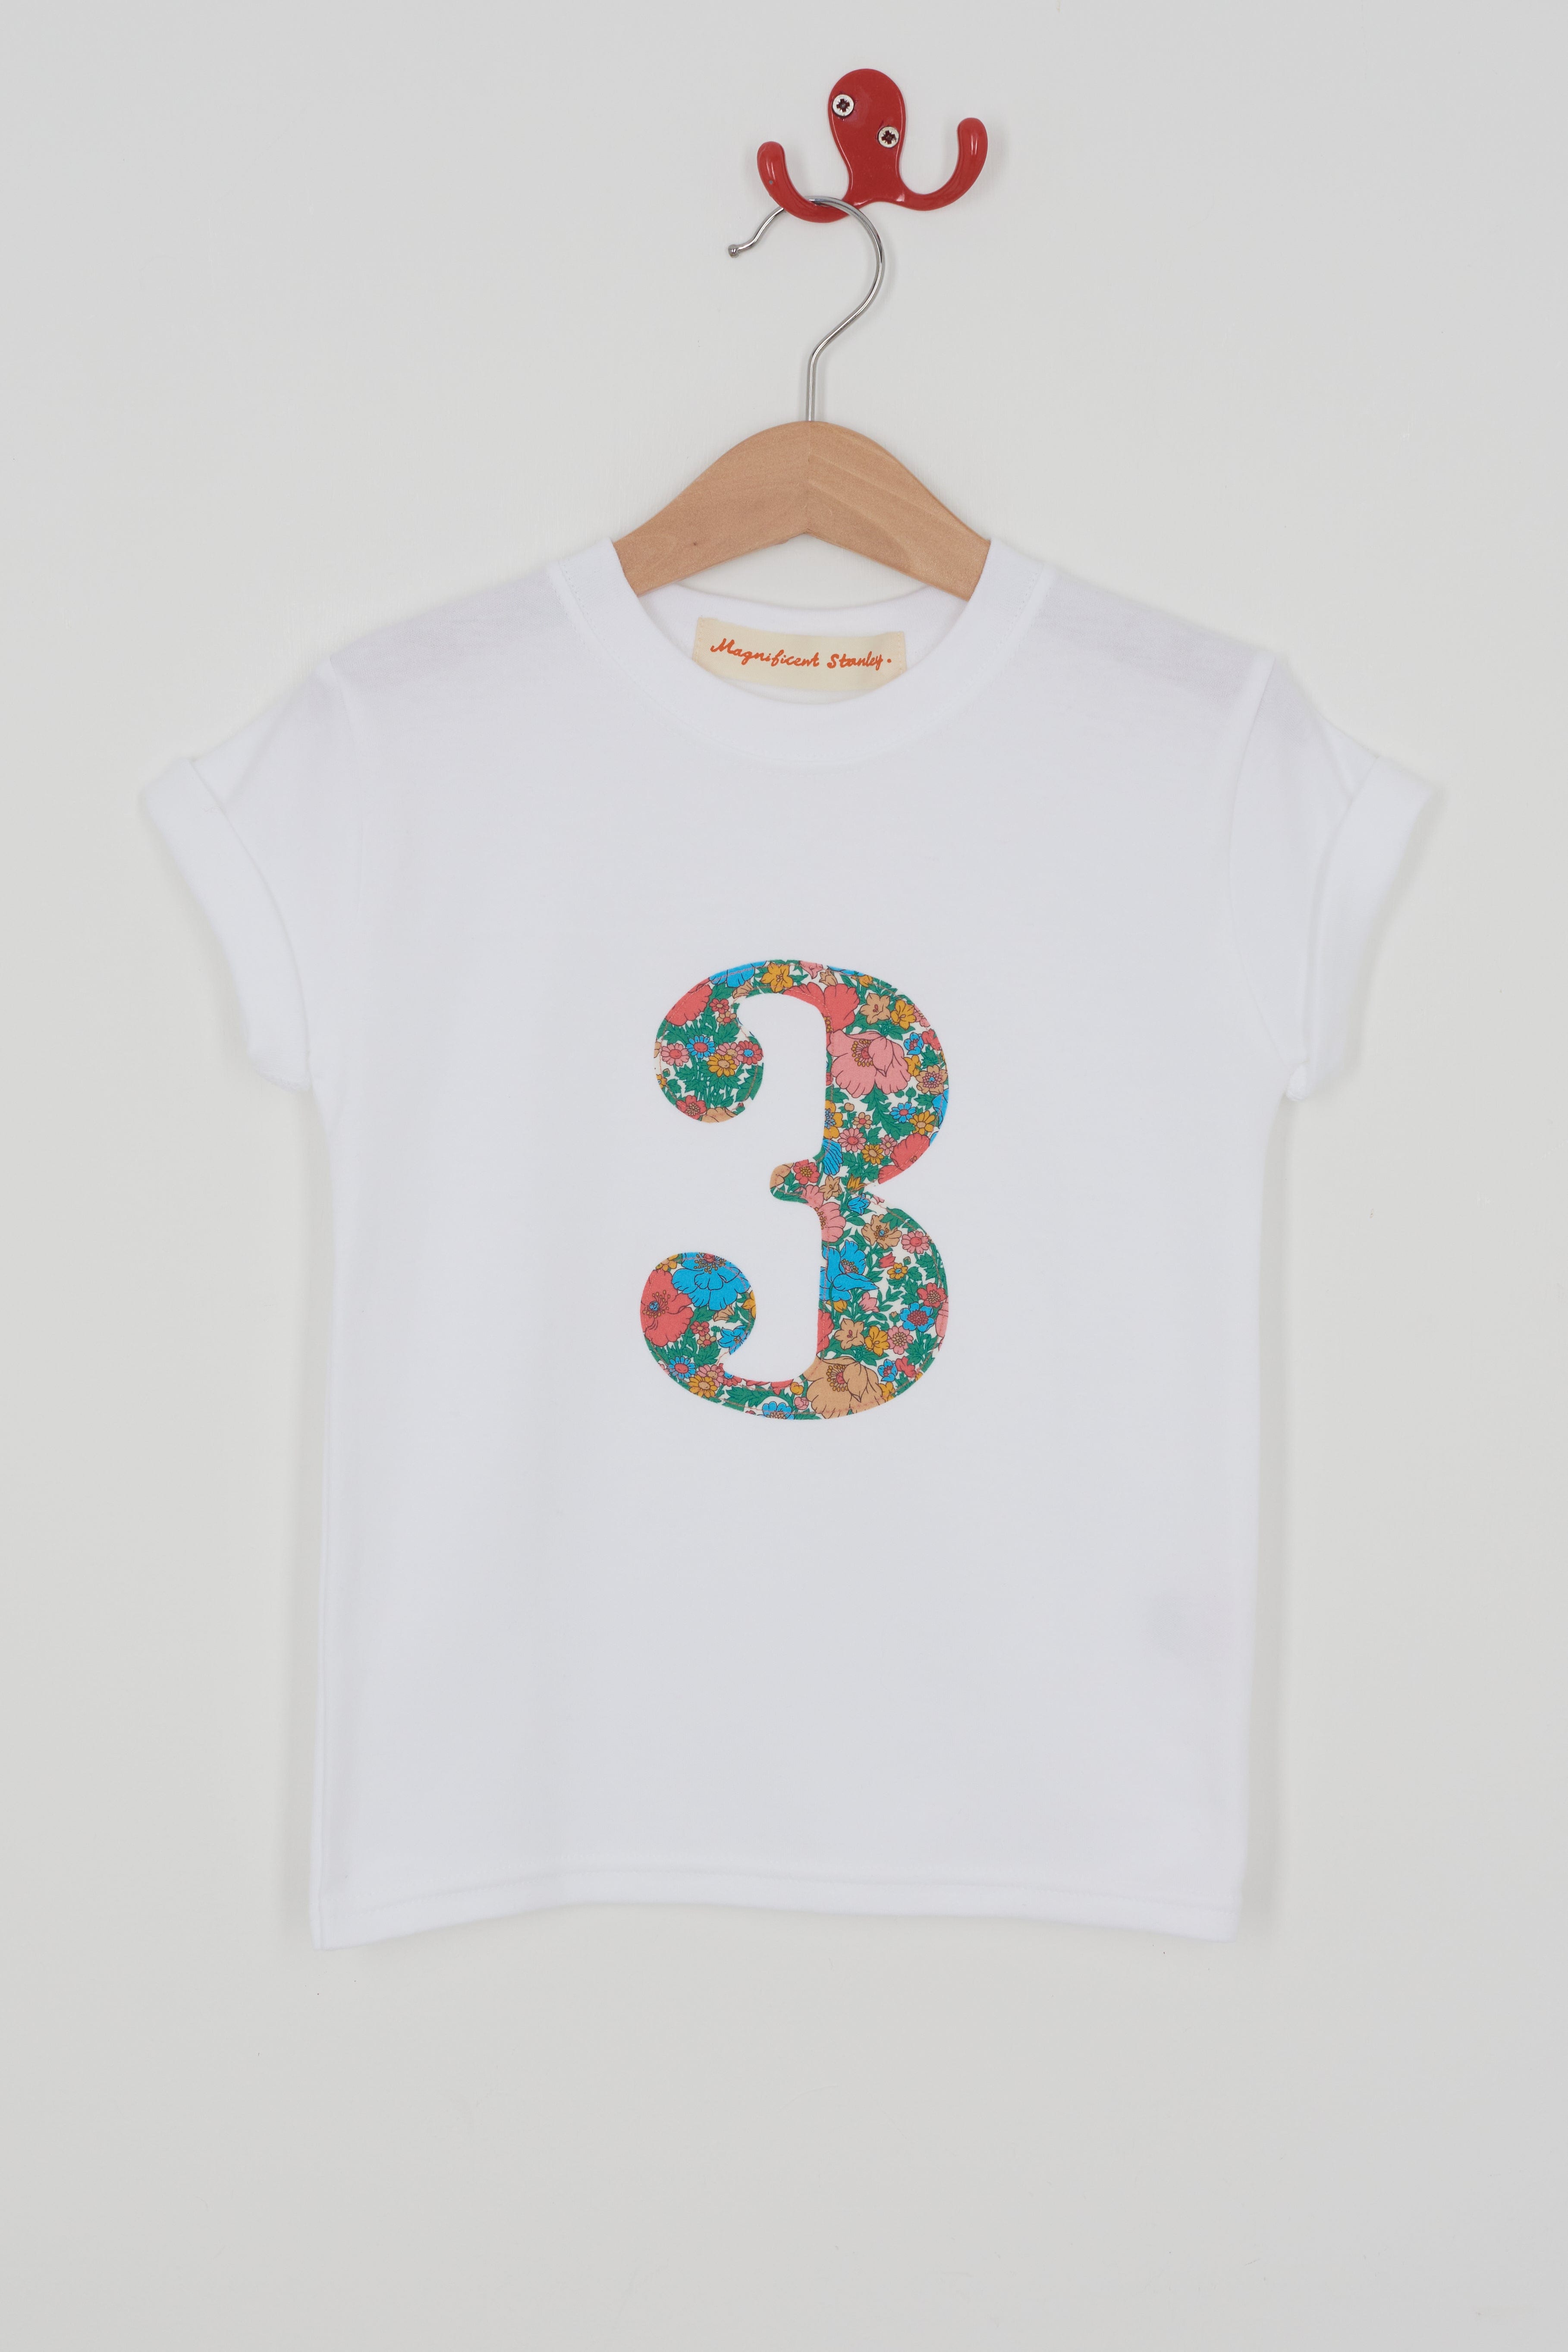 Magnificent Stanley Tee Number White T-Shirt in Meadow Song Liberty Print